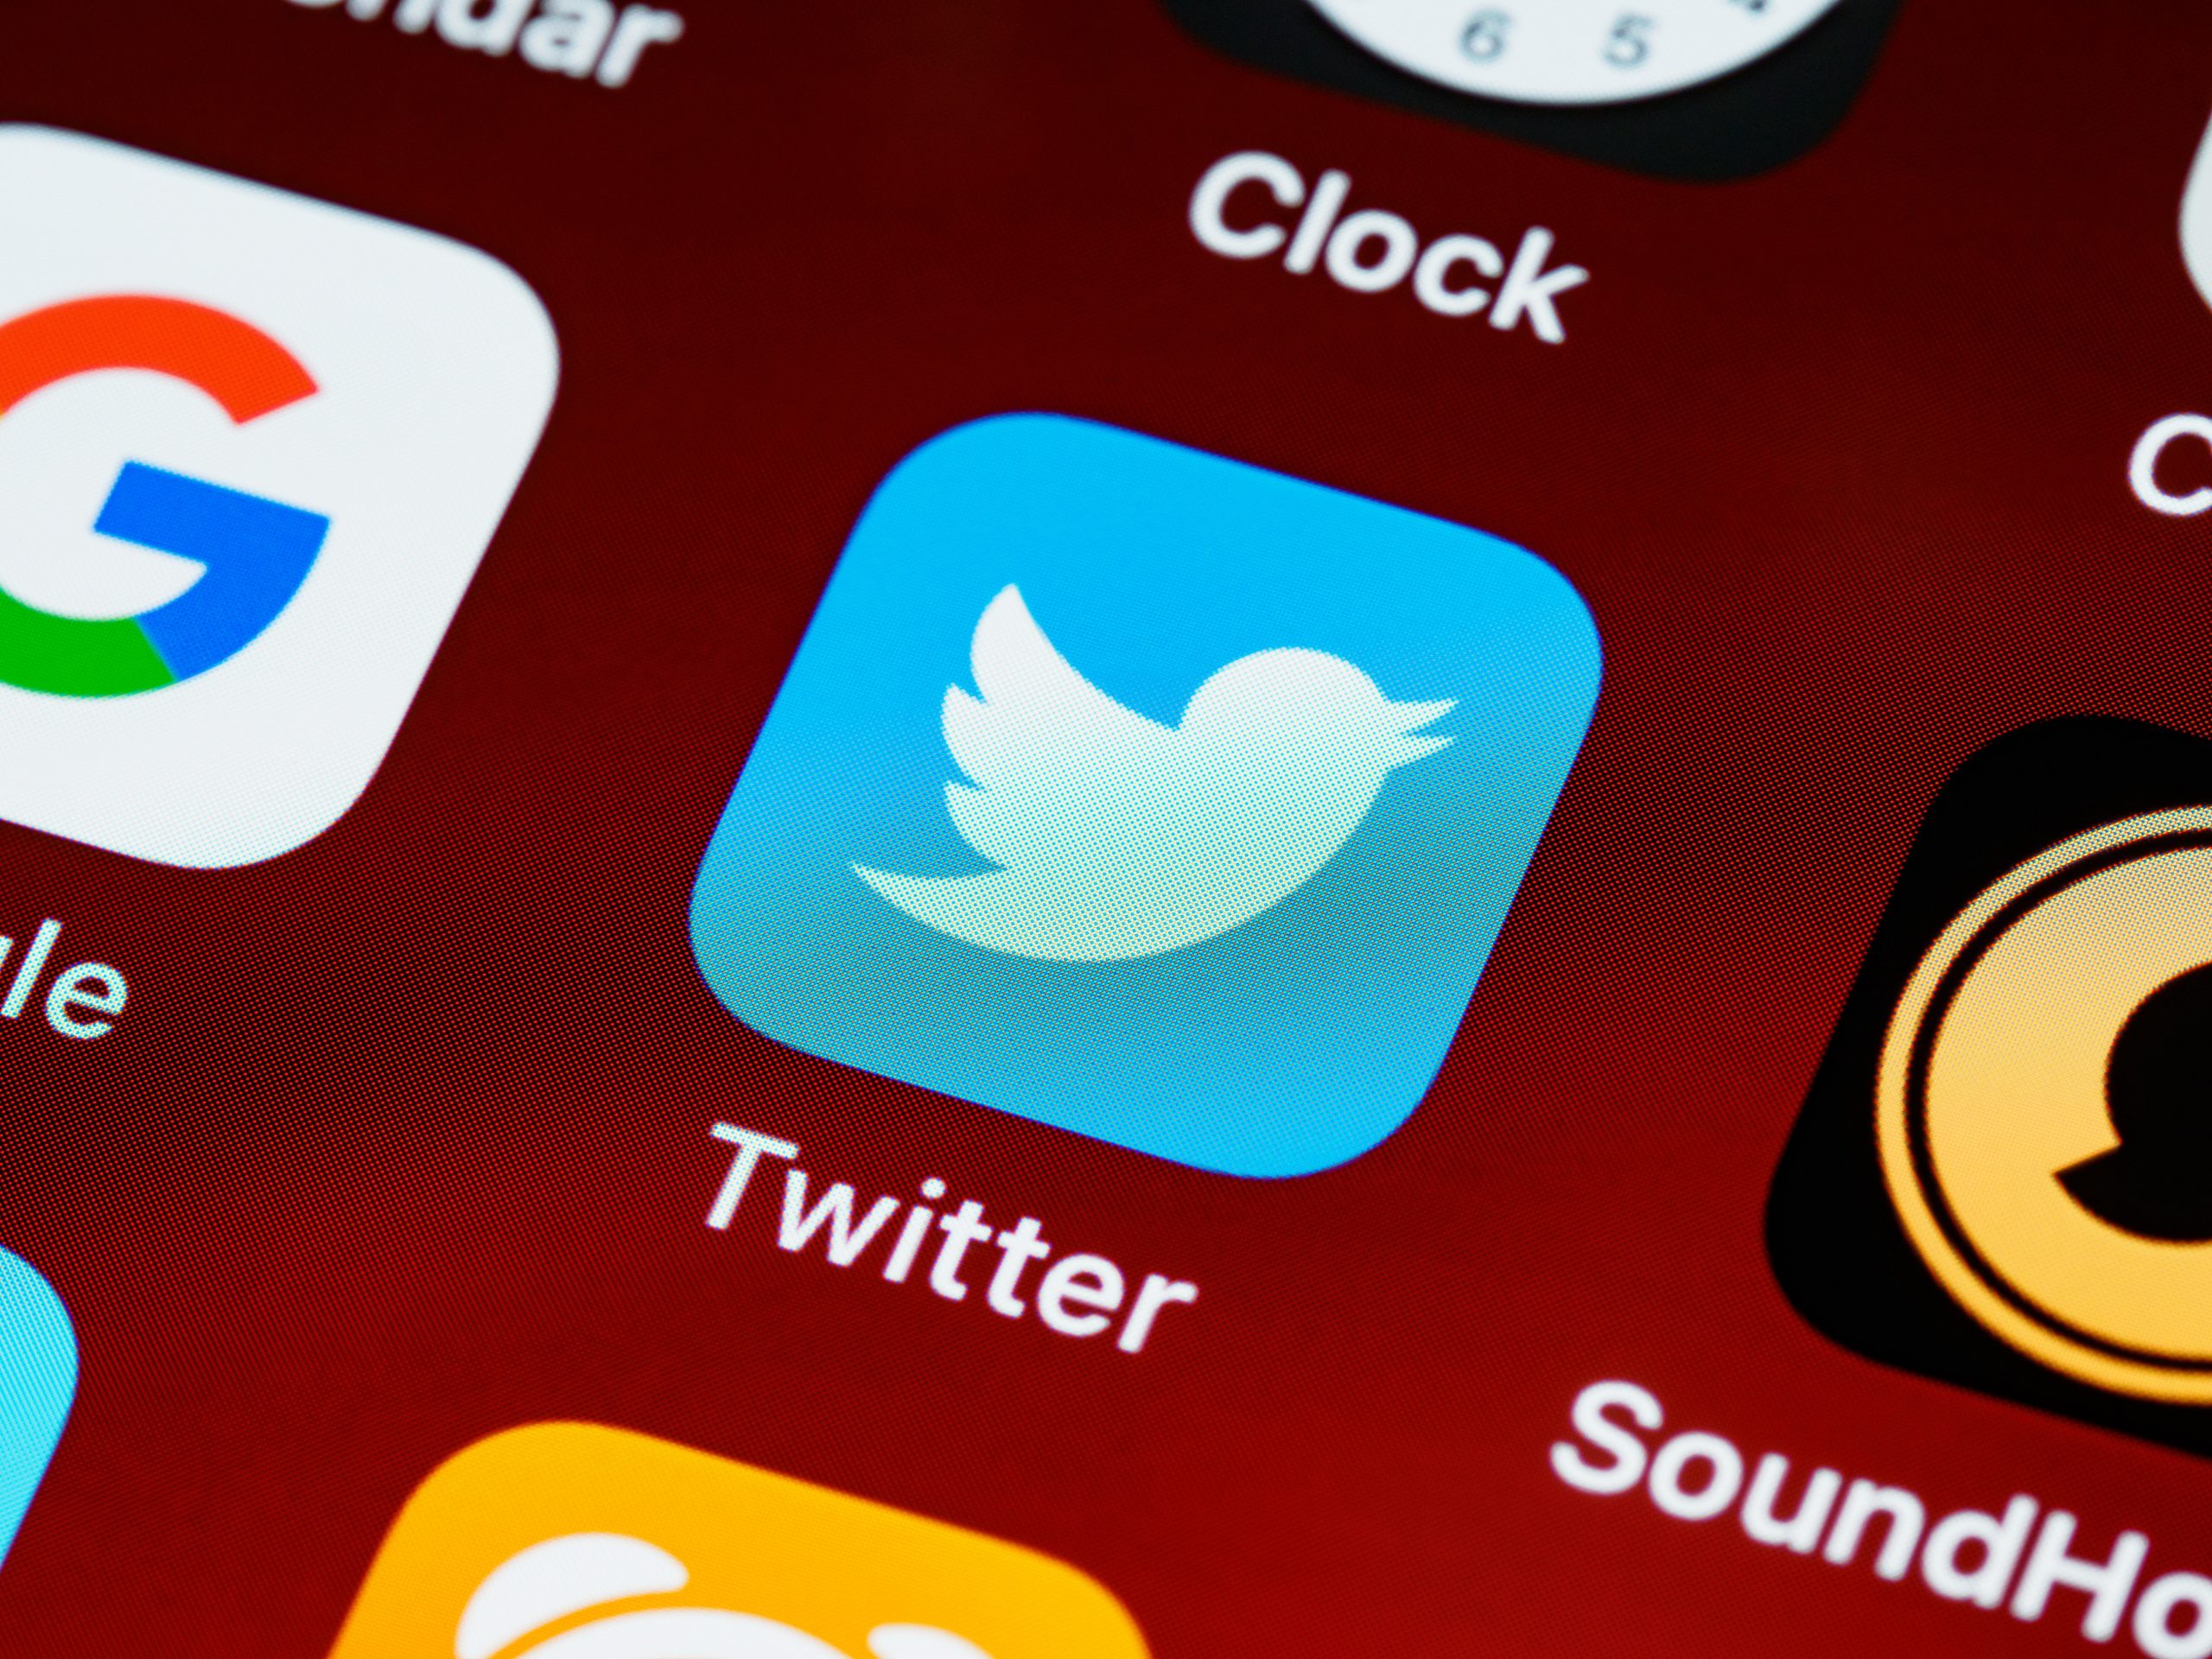 Twitter grows 27% year-on-year, totalling 192 million daily active users by the end of 2020